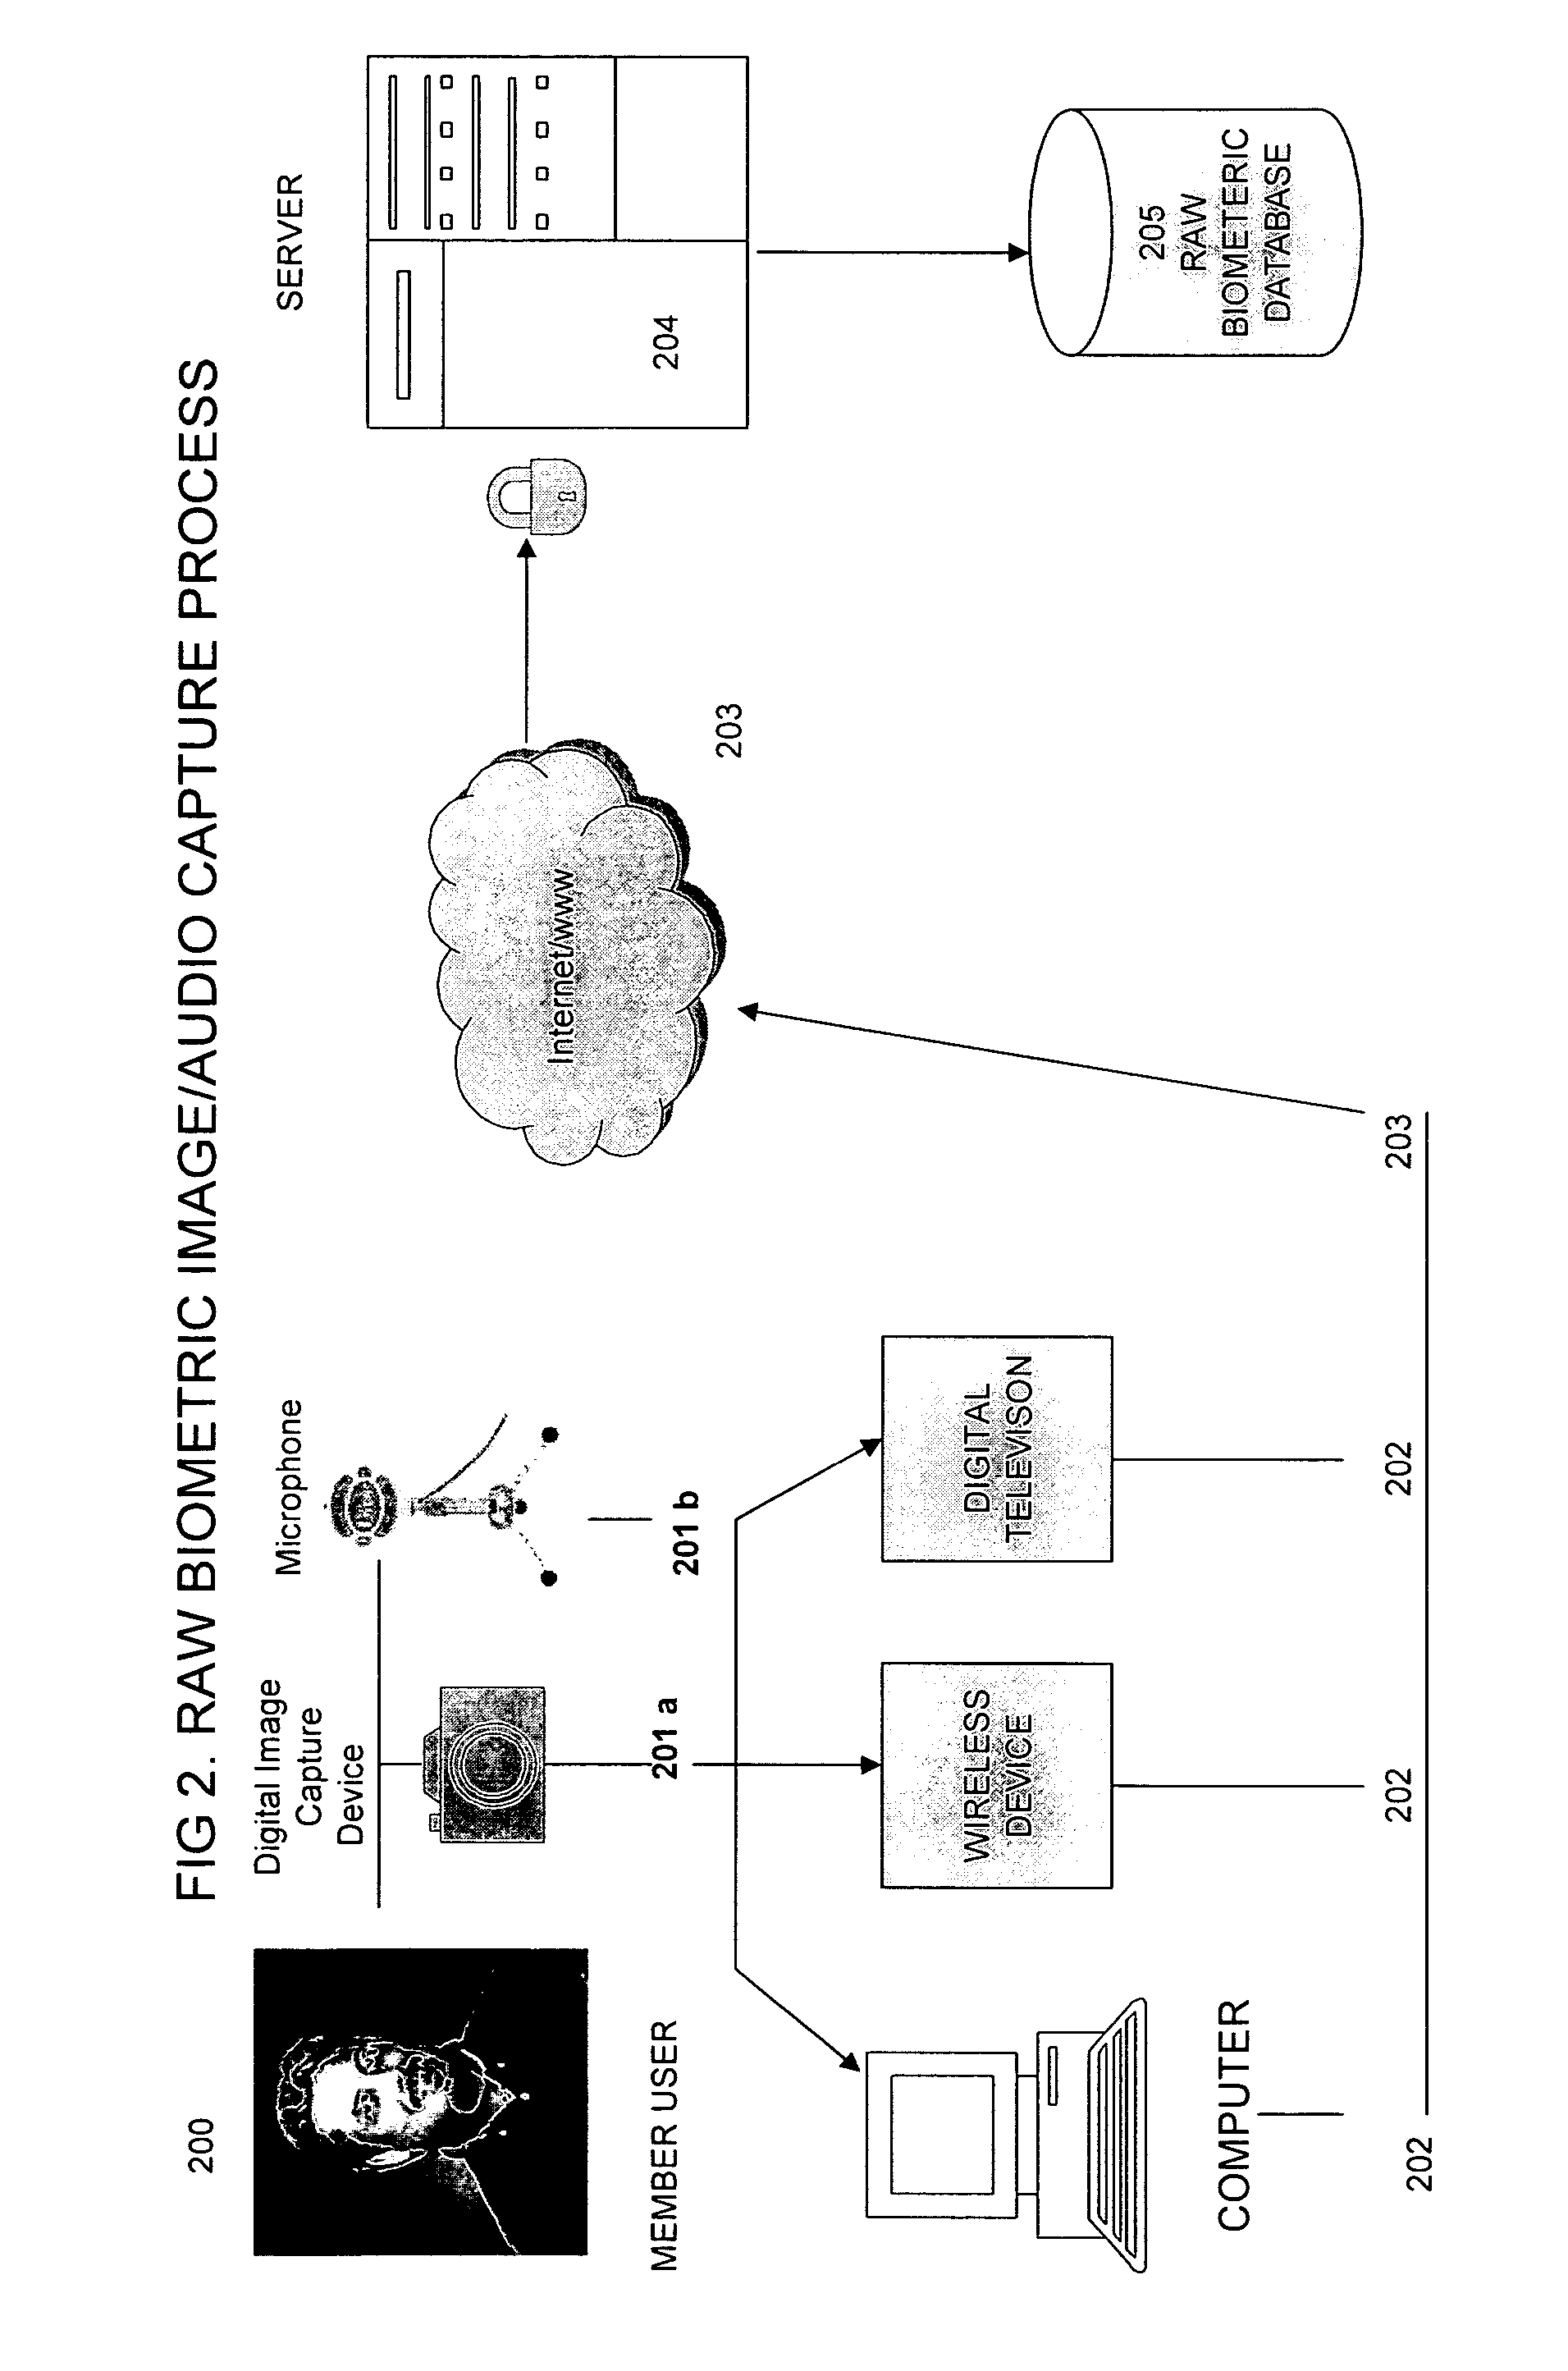 Method for user biometric artifical authentication